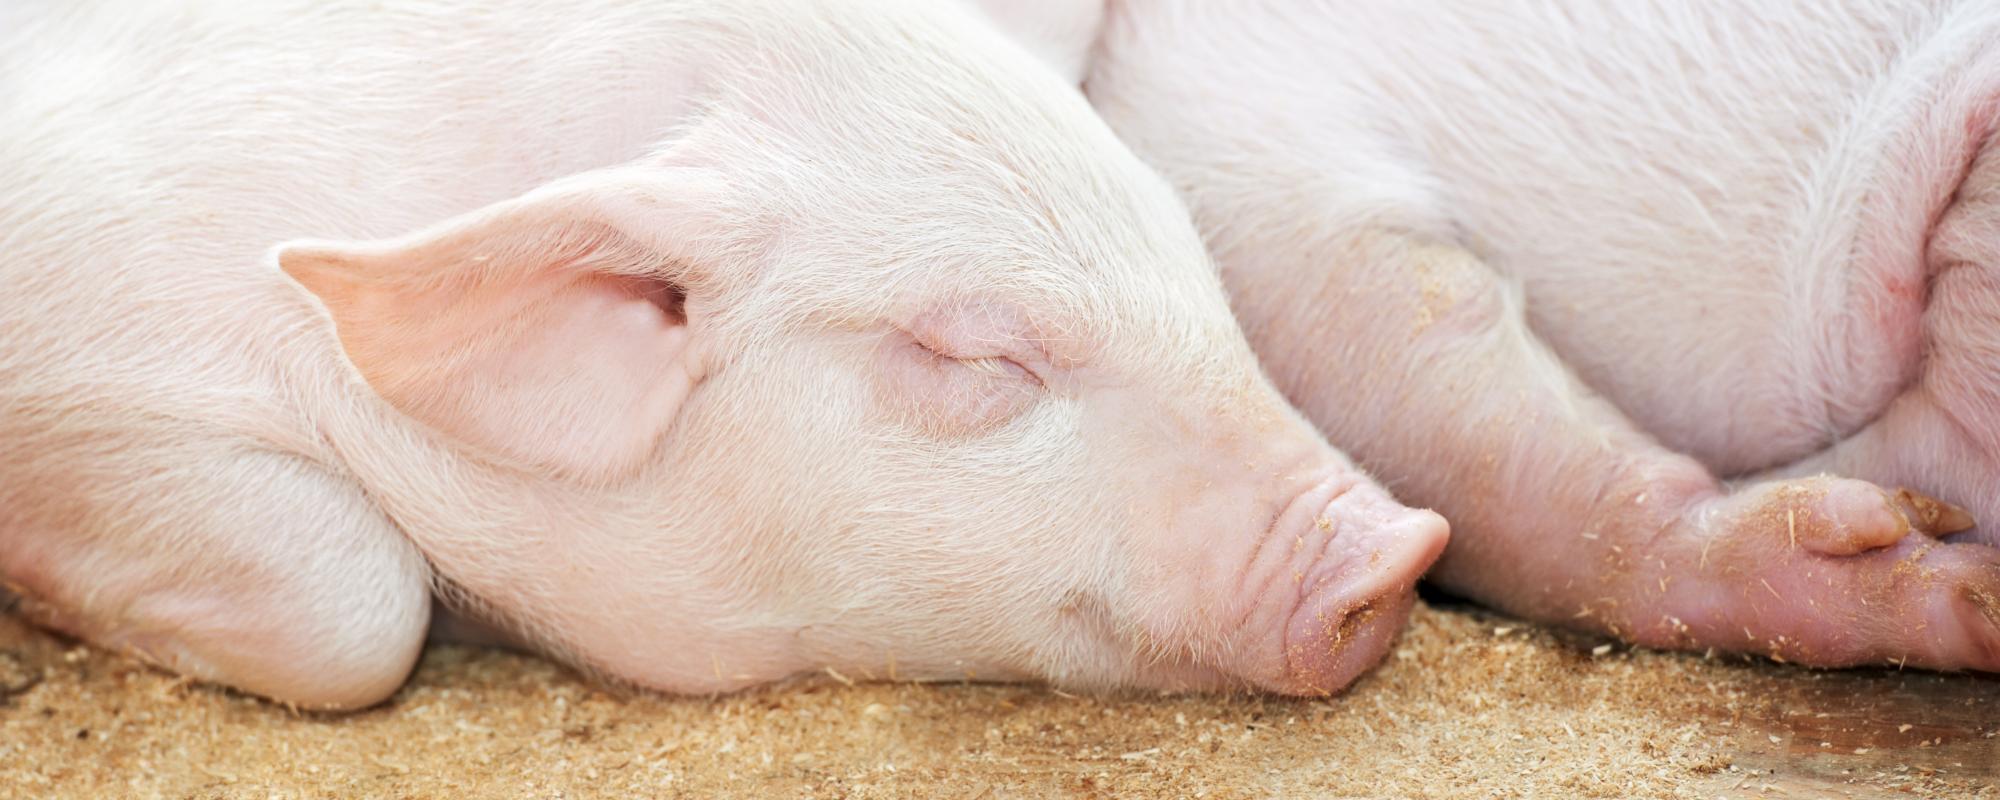 What is the normal body temperature range of a pig?